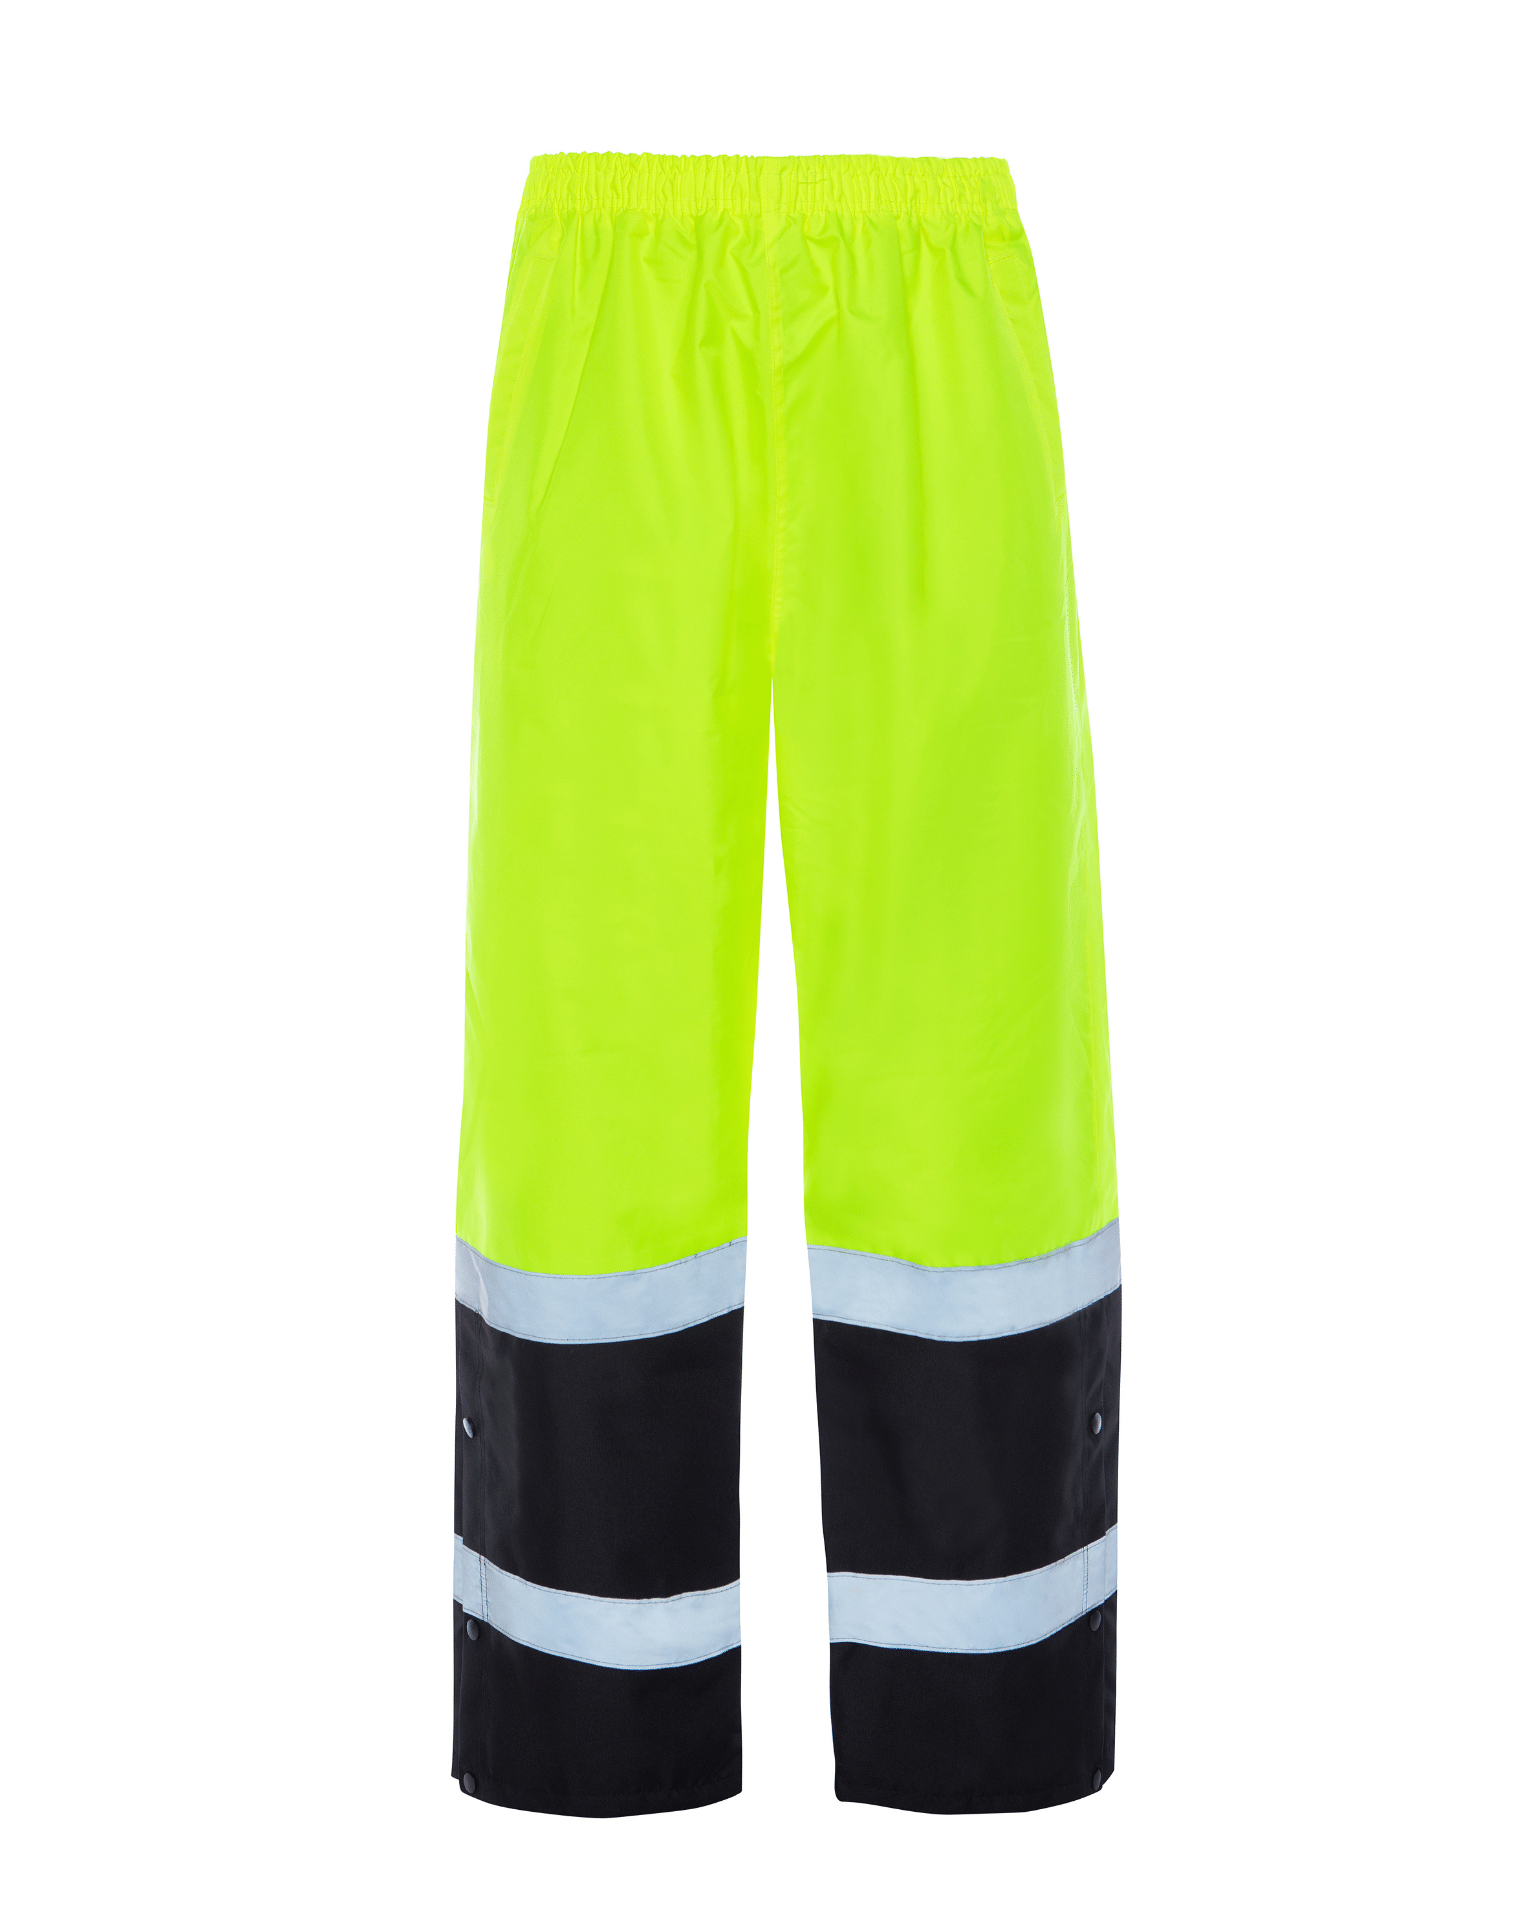 ANSI Class E High Visibility waterproof easy on and off pant by Utility Pro 